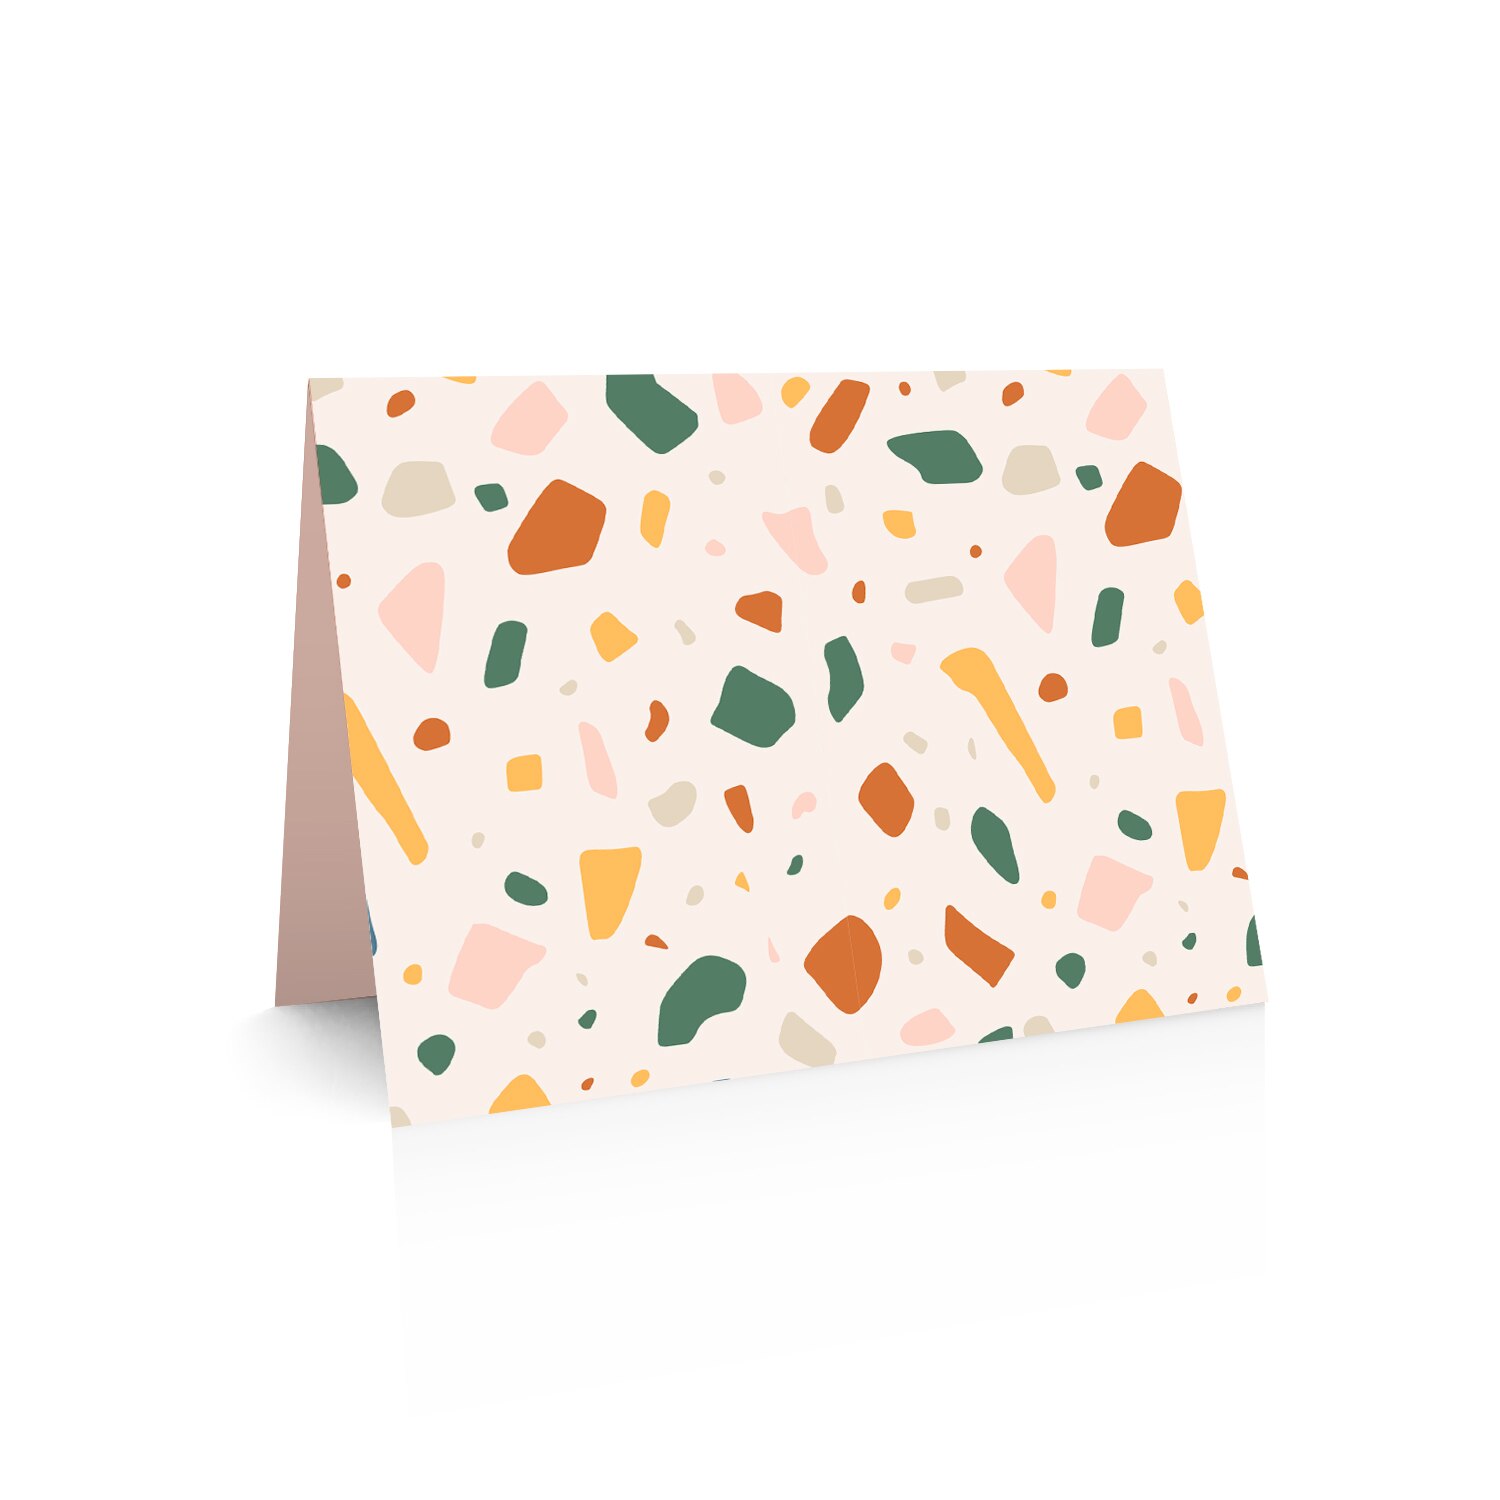 TERRAZZO BLANK BOXED CARDS SET OF 10